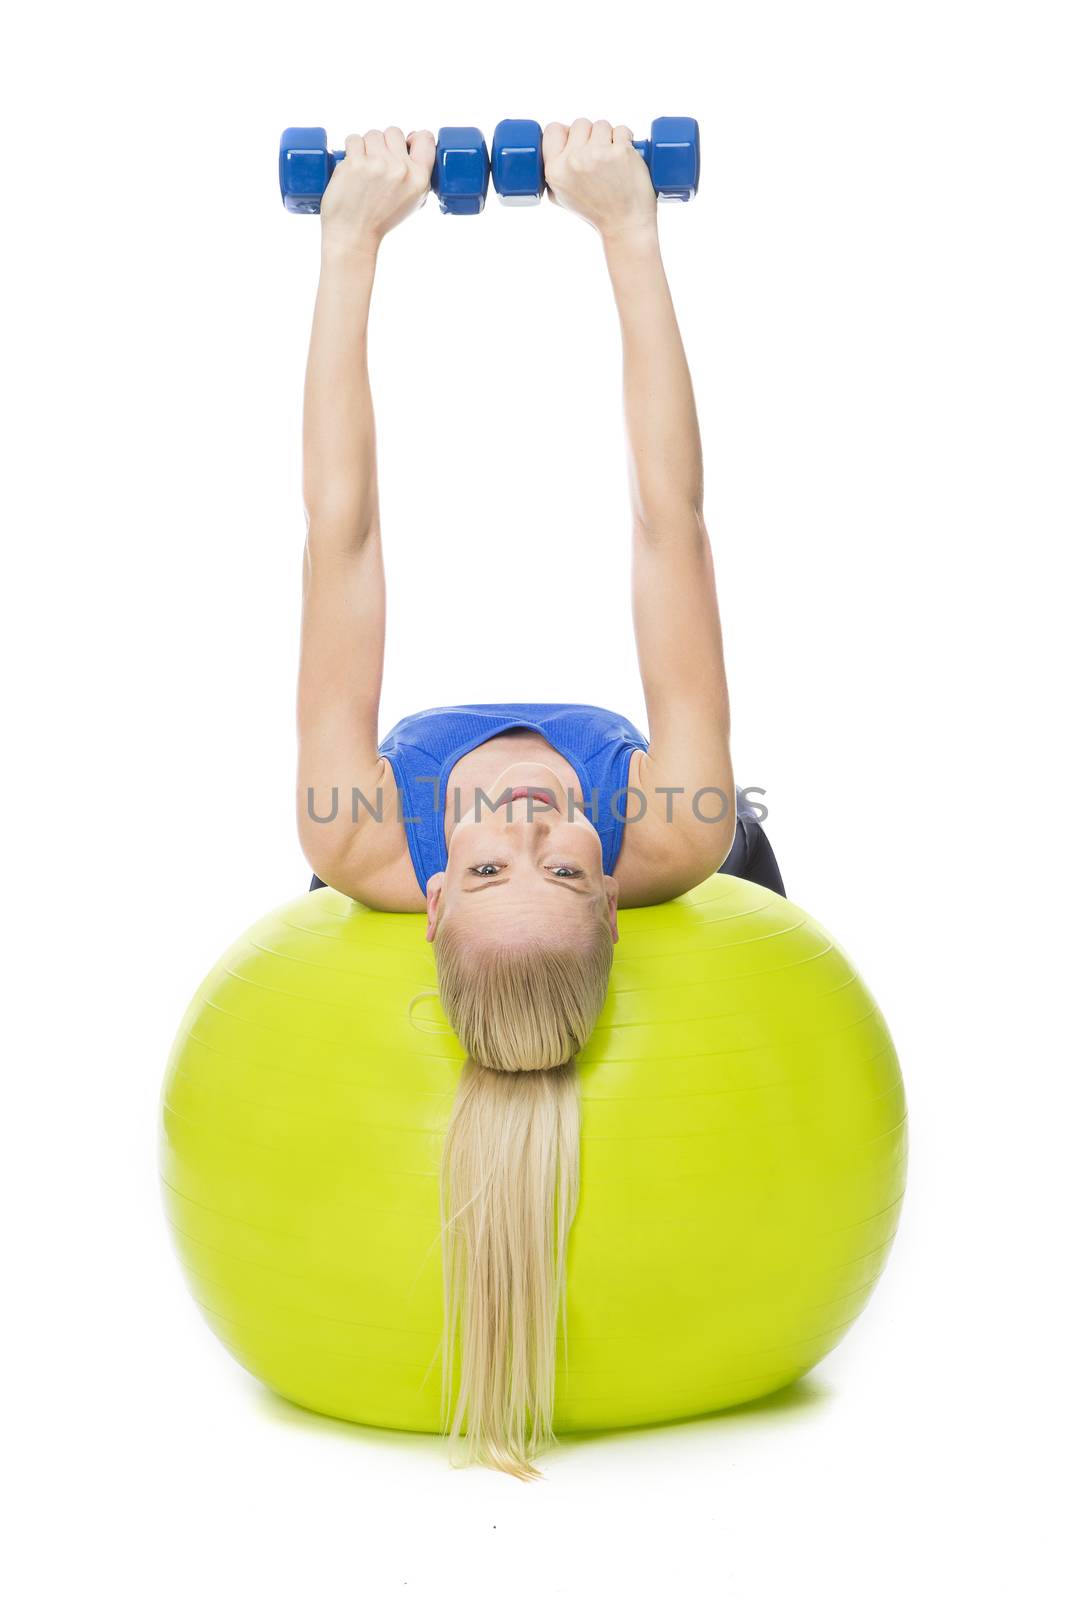 blonde woman wearing fitness clothing exercising with weights on a yellow ball